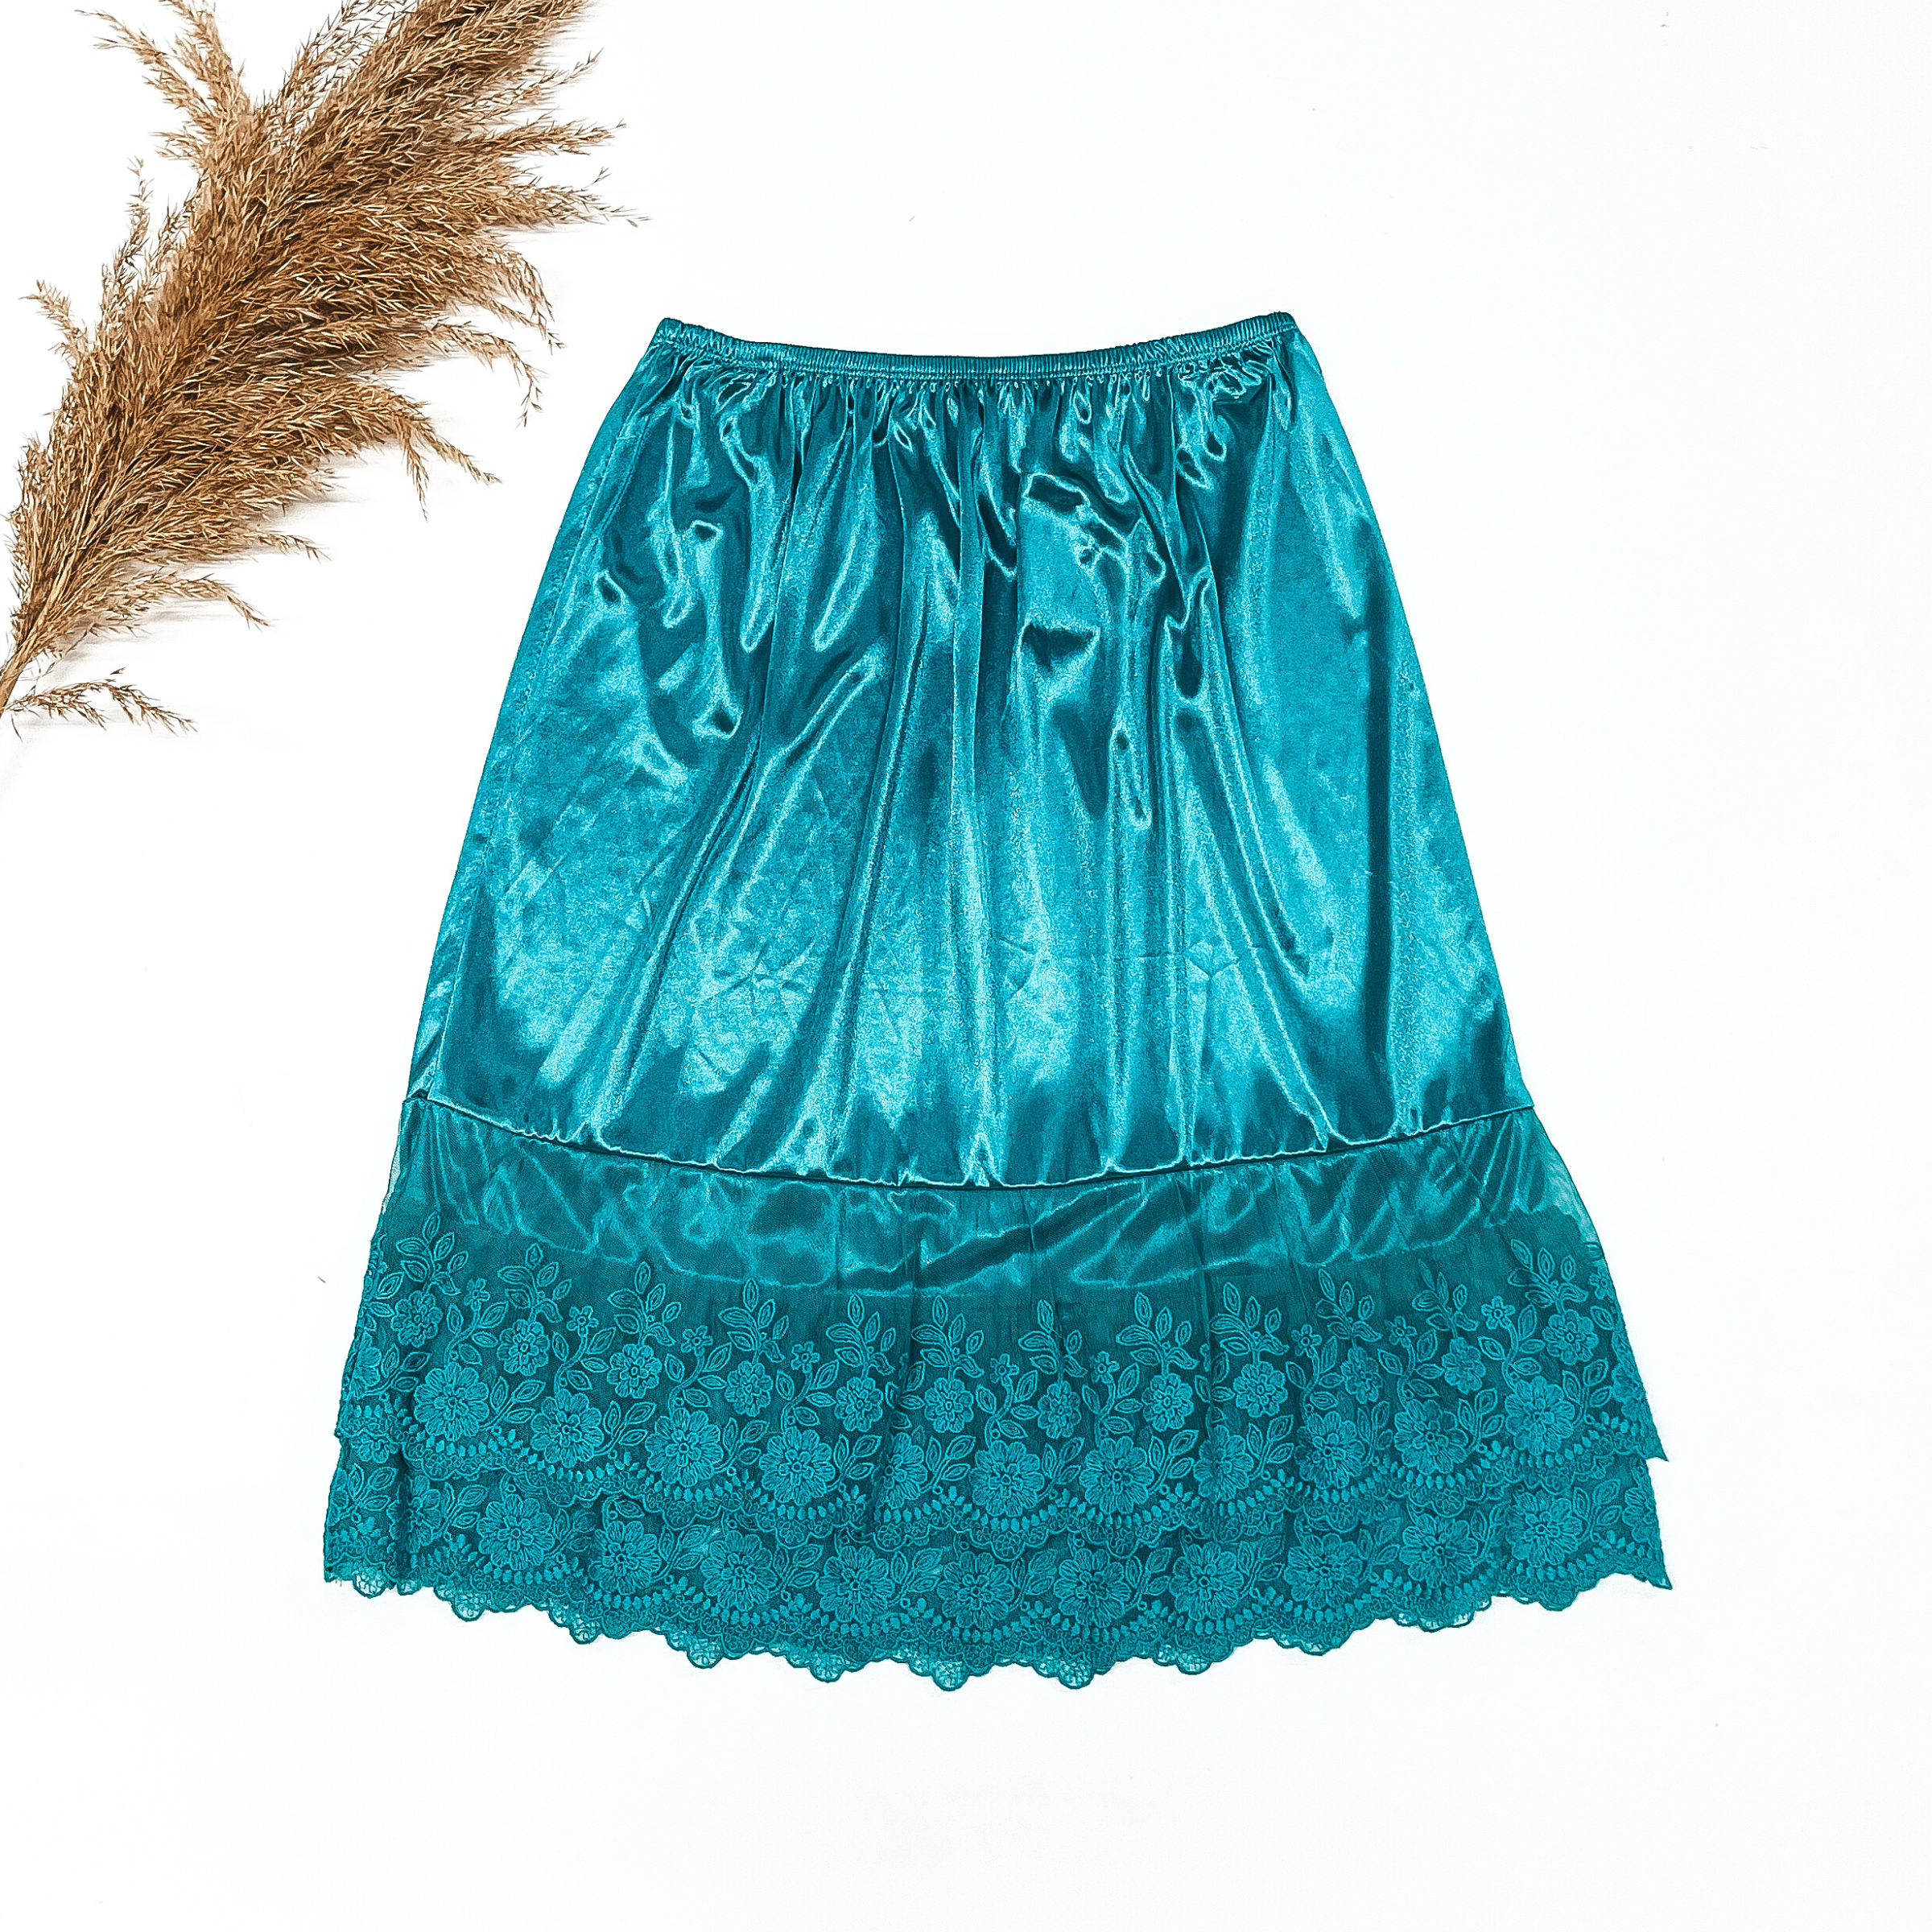 Satin Skirt Slip with Lace Trim in Turquoise | ONLY 1 LEFT! - Giddy Up Glamour Boutique